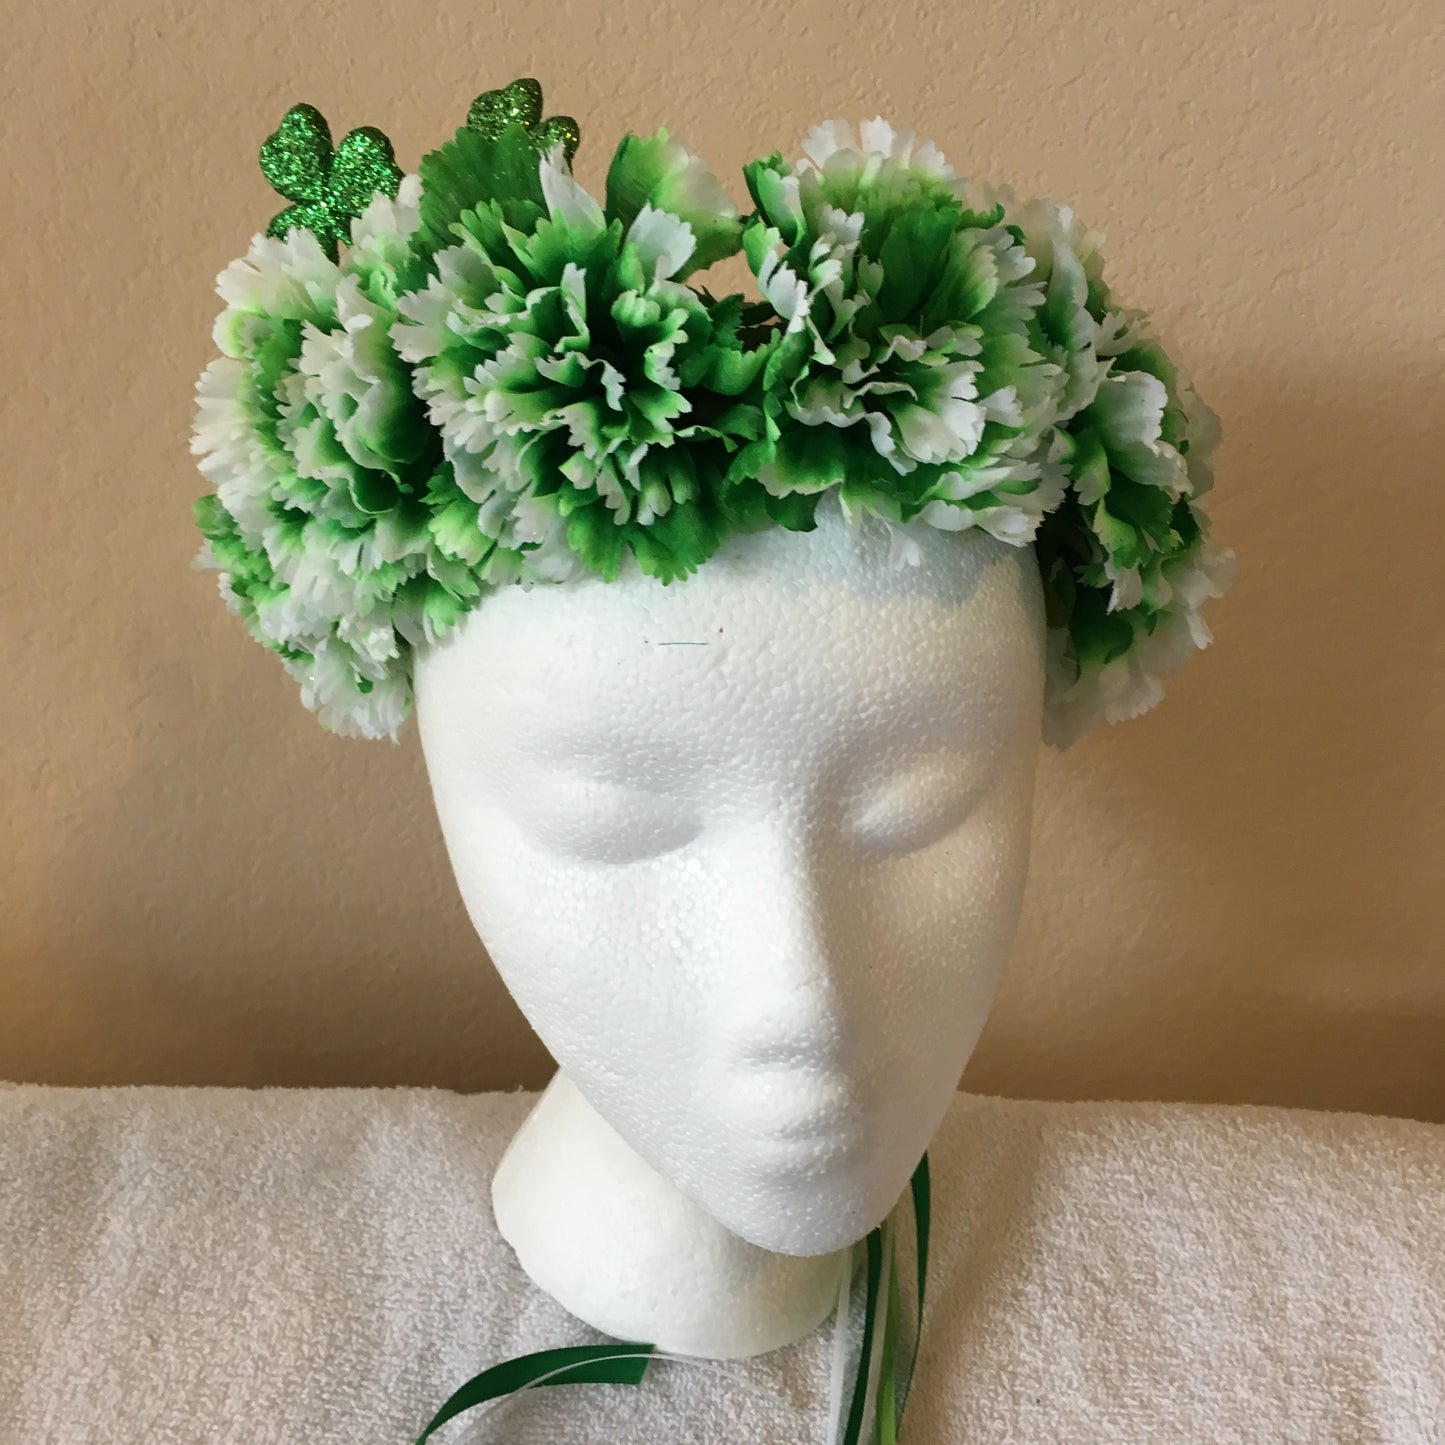 Show Special Wreath - Green & white carnations w/ two shamrock accents